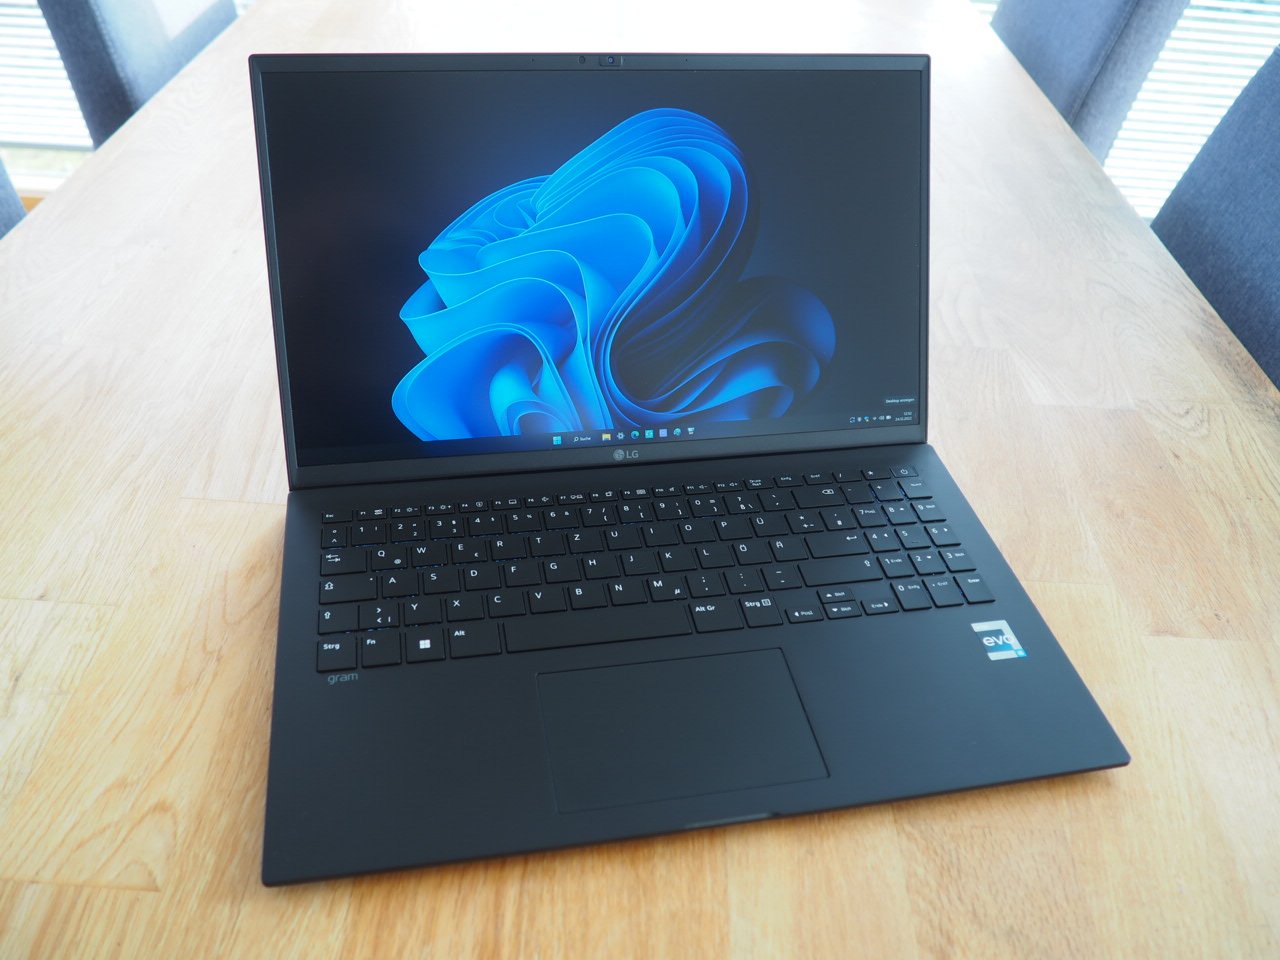 LG Gram 15 (2022) laptop review: Focused on portability